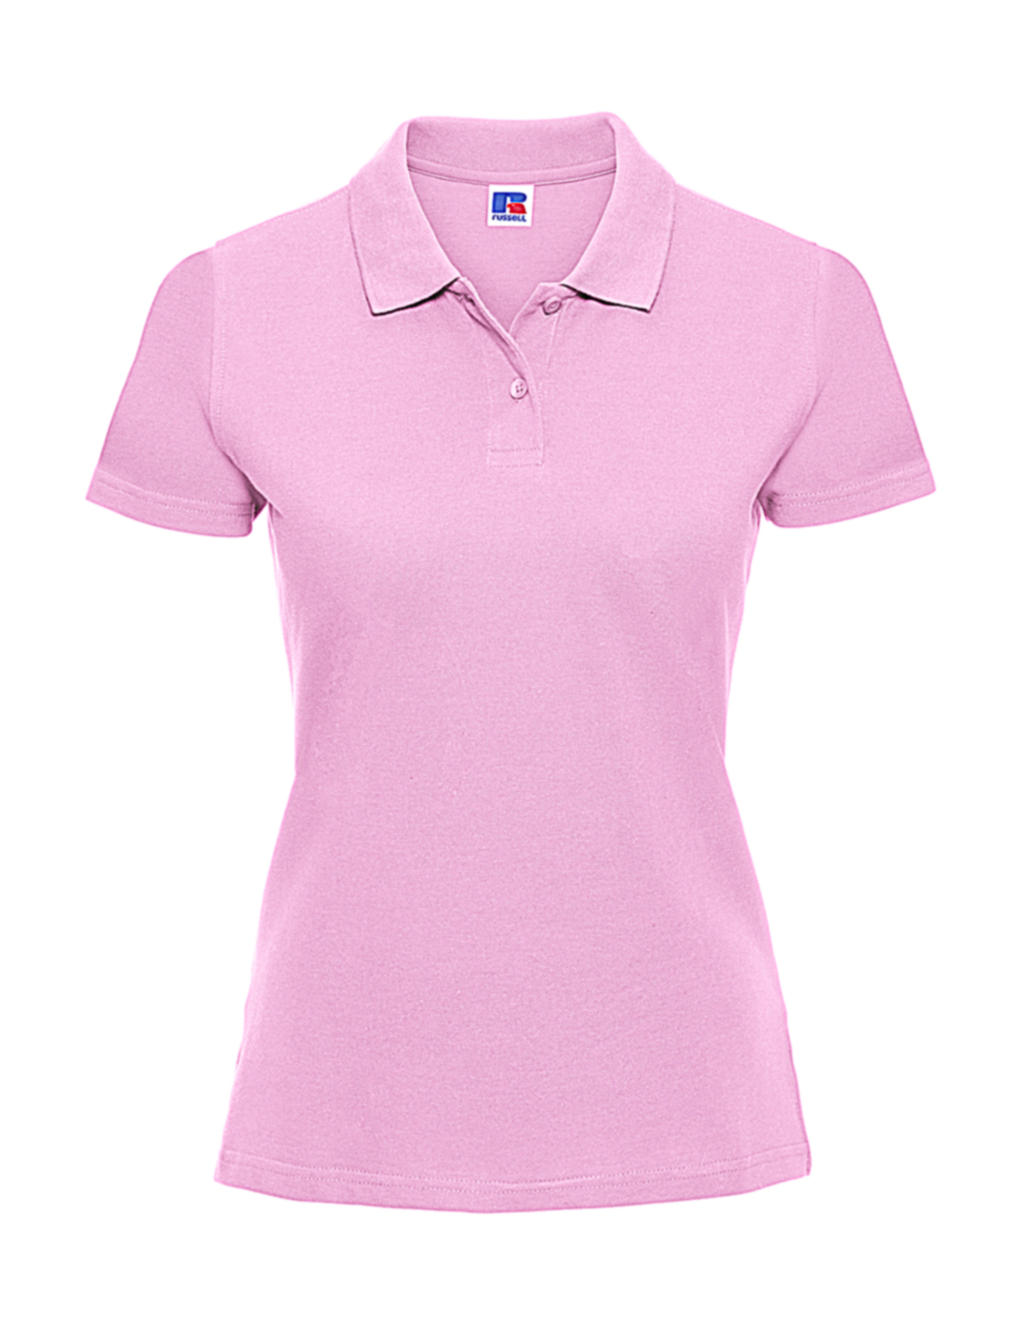  Ladies Classic Cotton Polo in Farbe Candy Pink